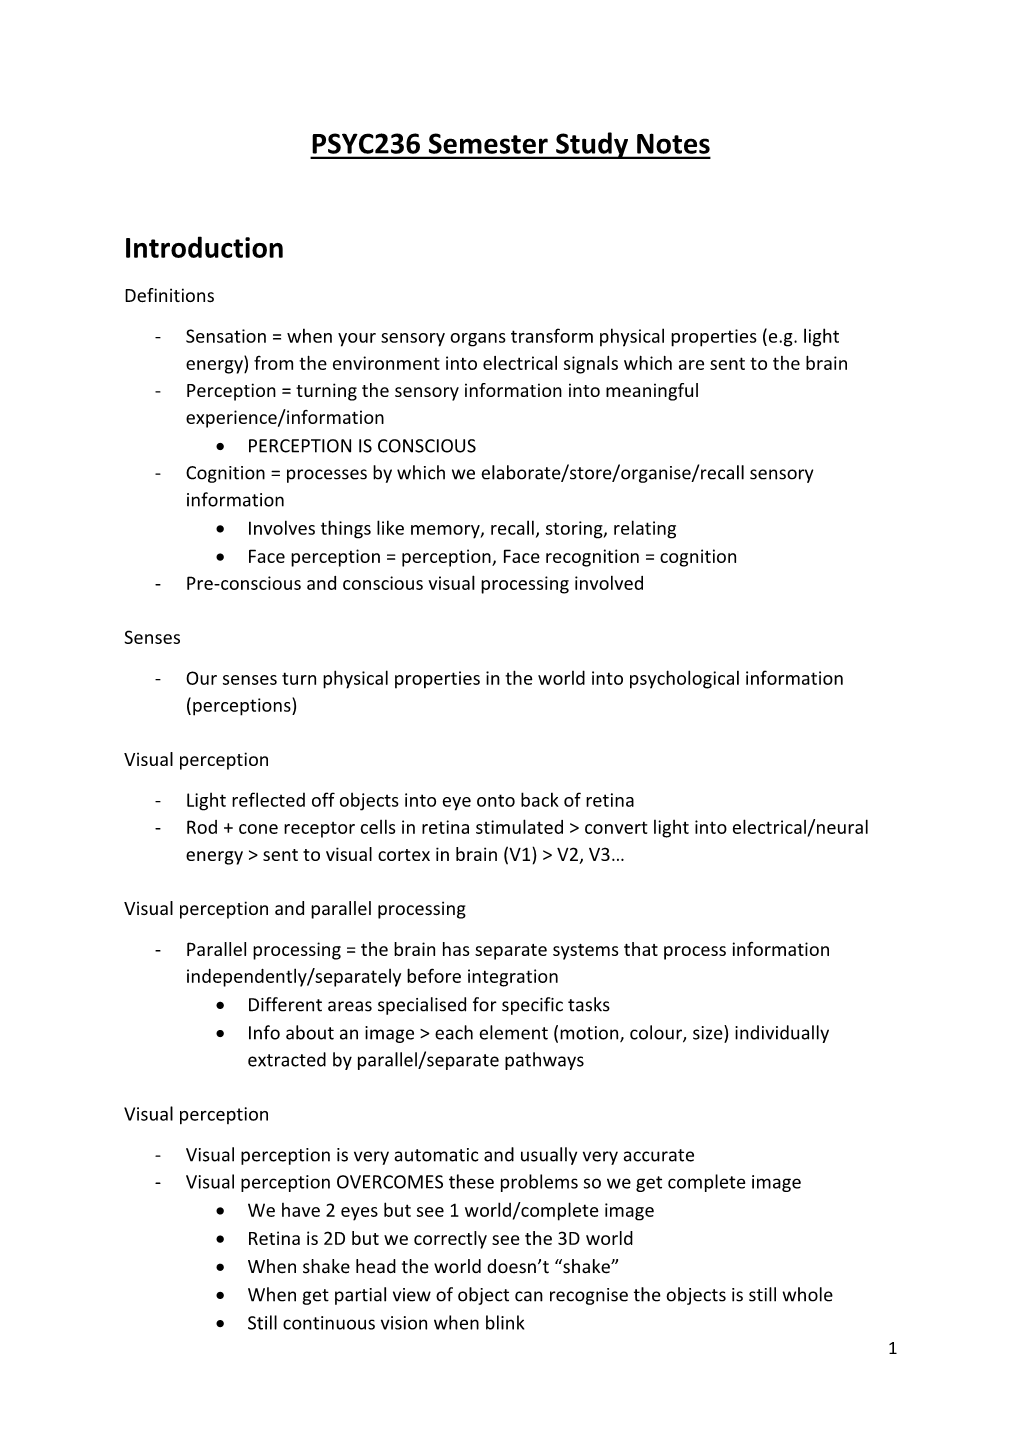 PSYC236 Semester Study Notes Introduction